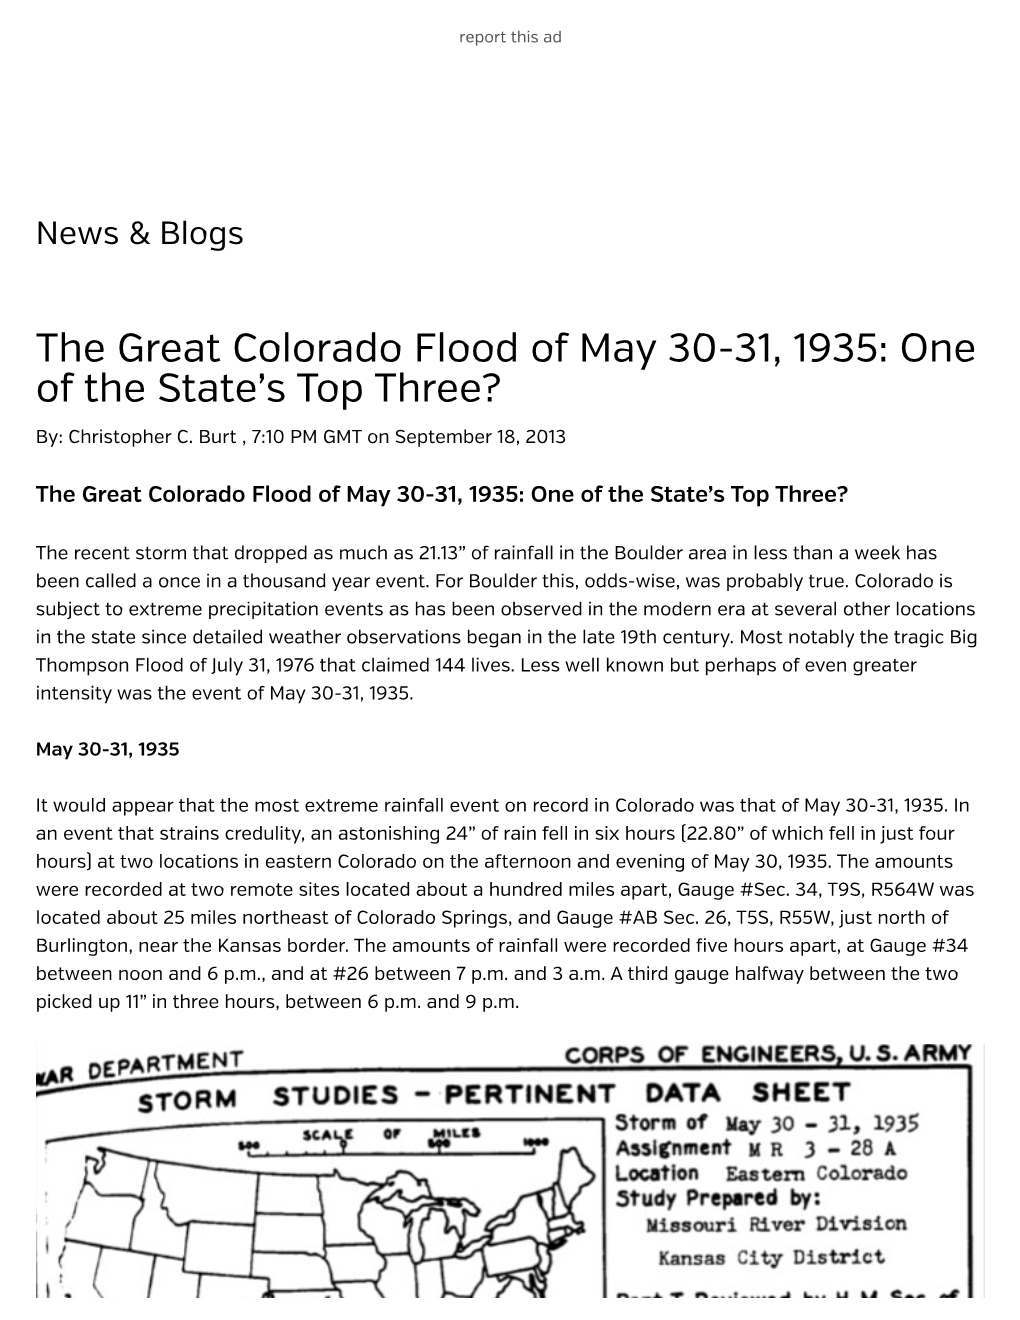 The Great Colorado Flood of May 30-31, 1935: One of the State's Top